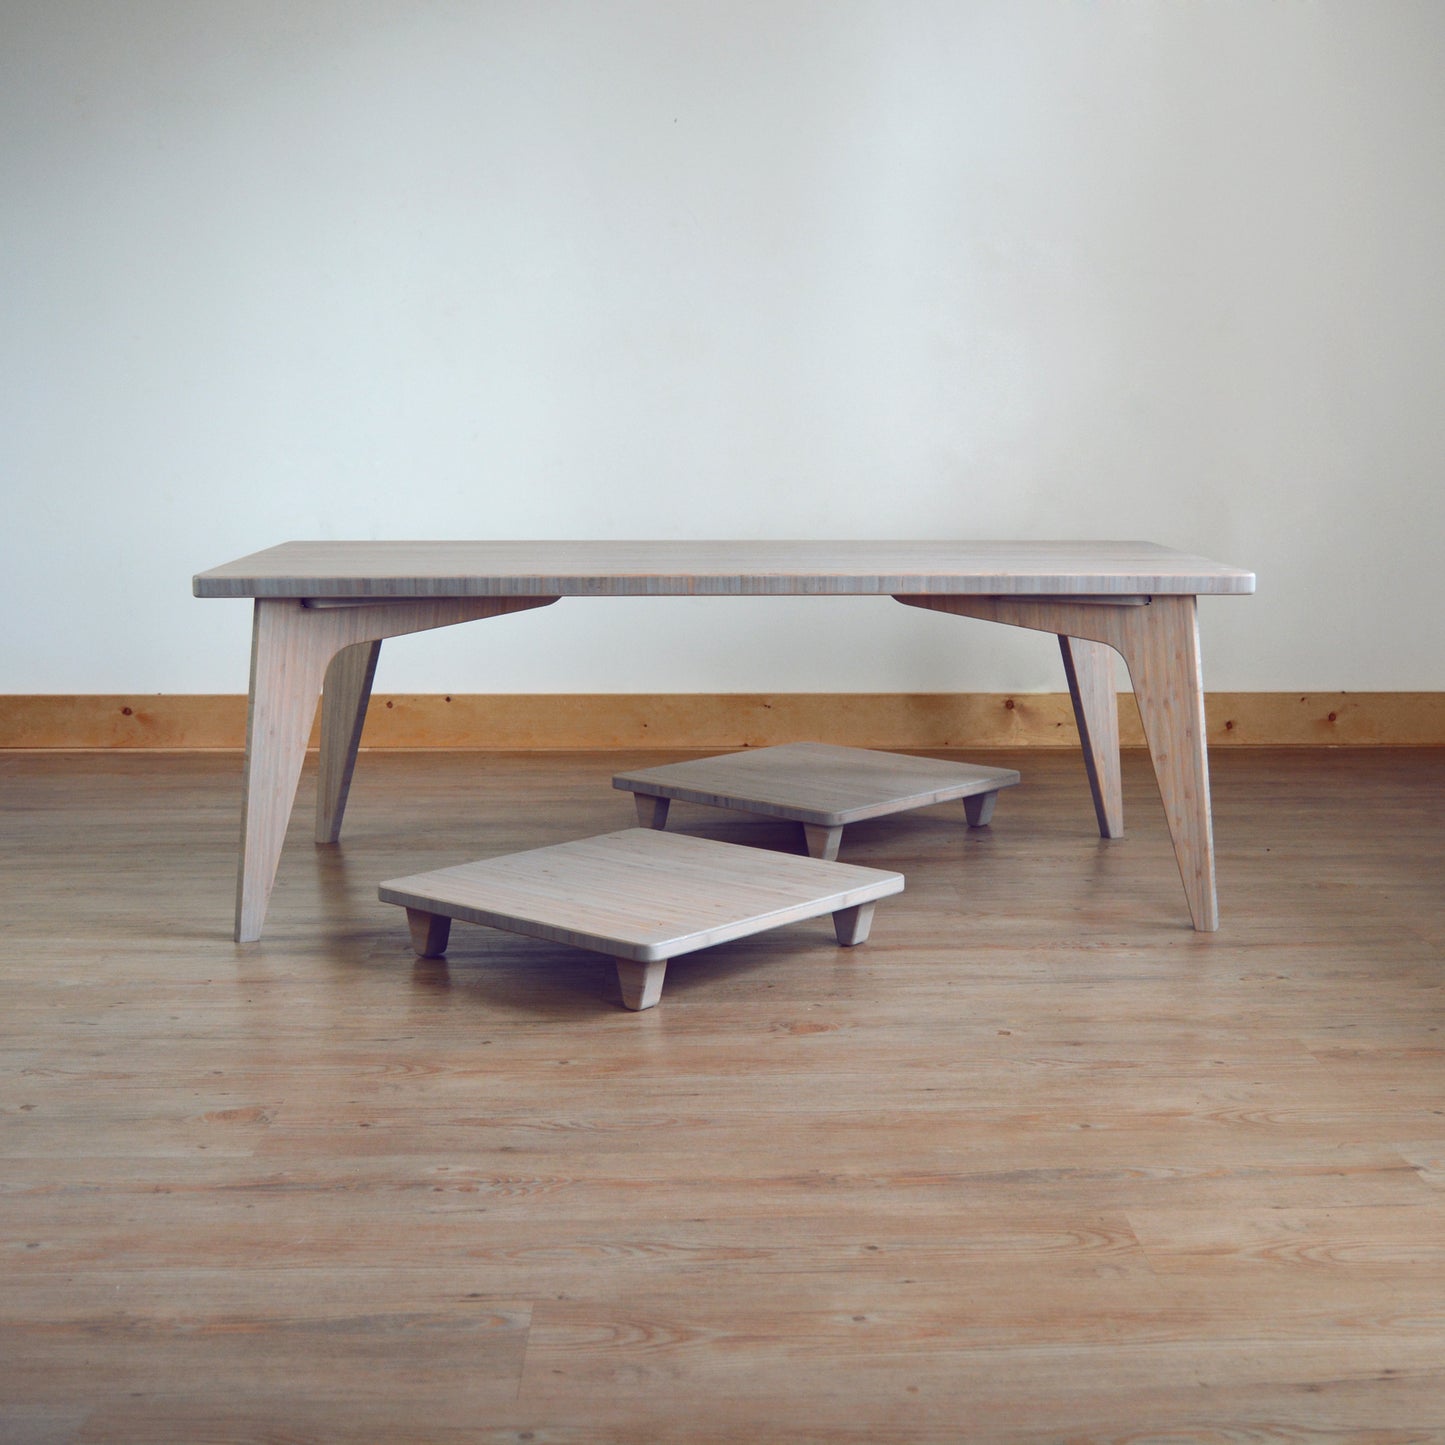 Grey bamboo table with pillow lifts. Japanese, mid-century, Scandinavian and contemporary inspired. Sustainable wood alternative, made from solid grass.